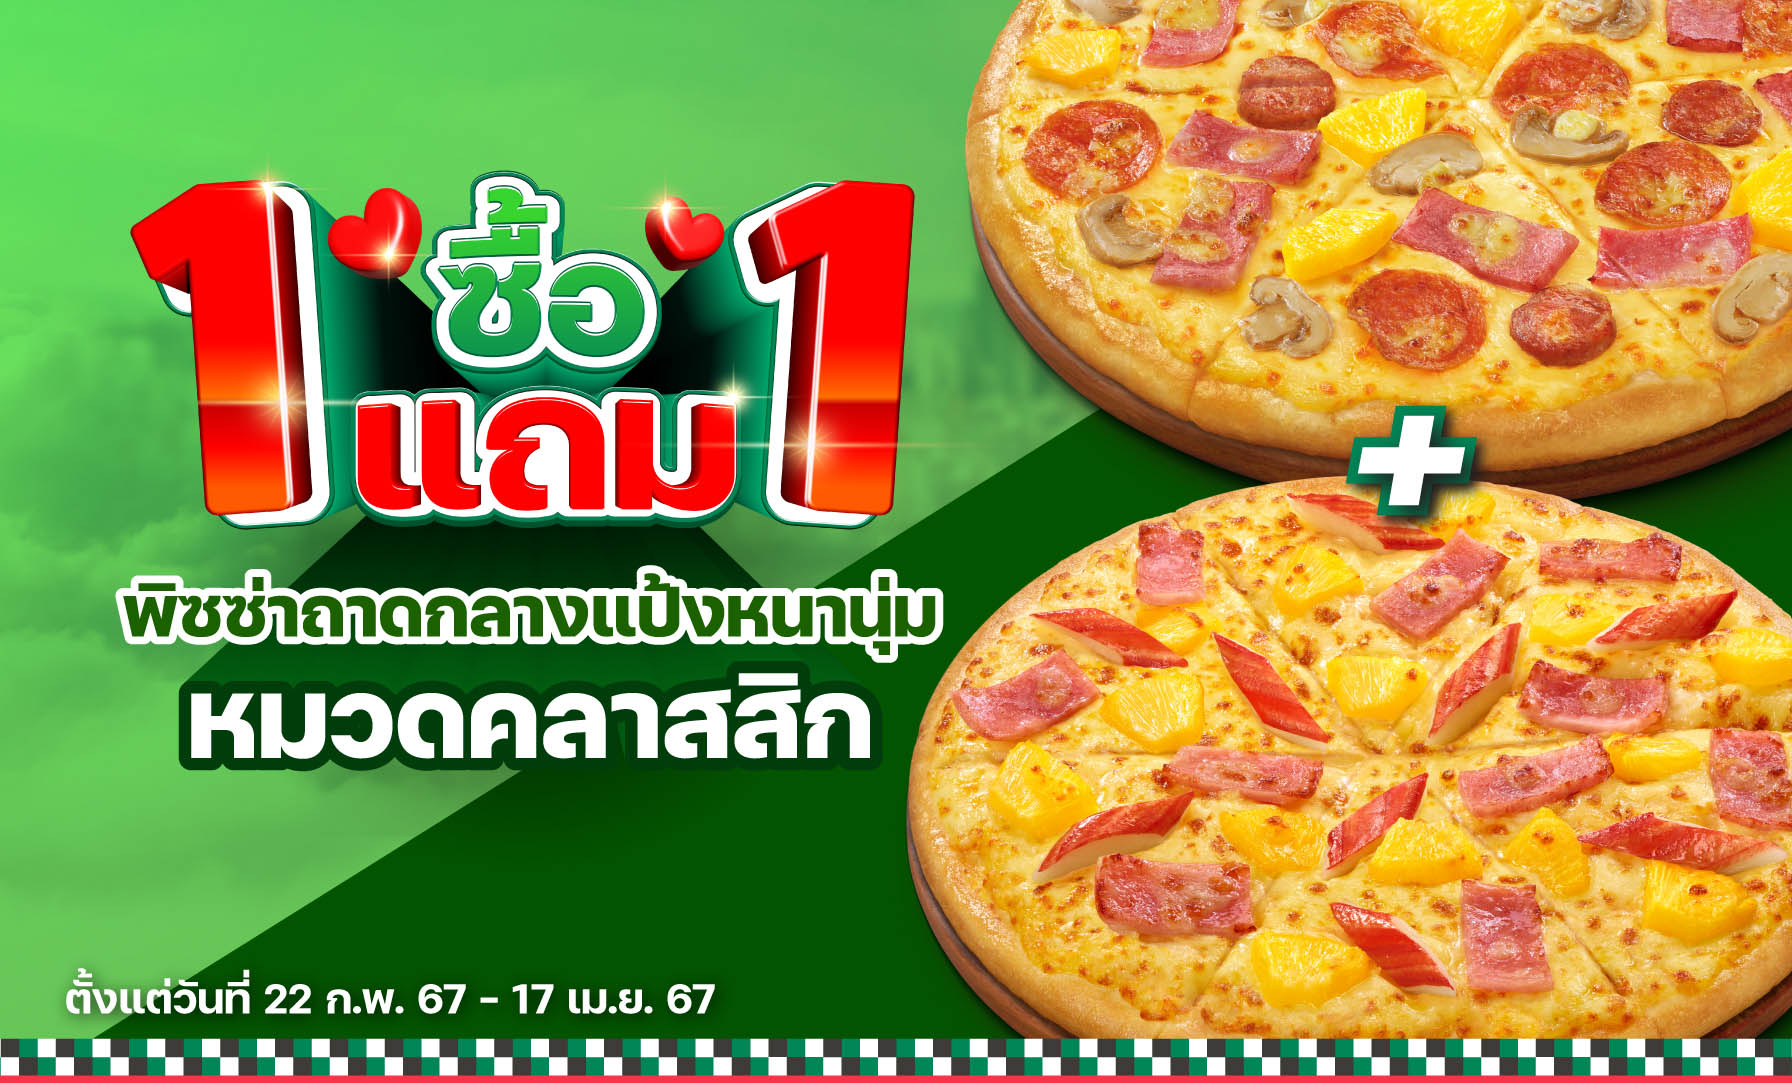 Buy 1 Get 1 Free Pan Pizza with Classic Topping